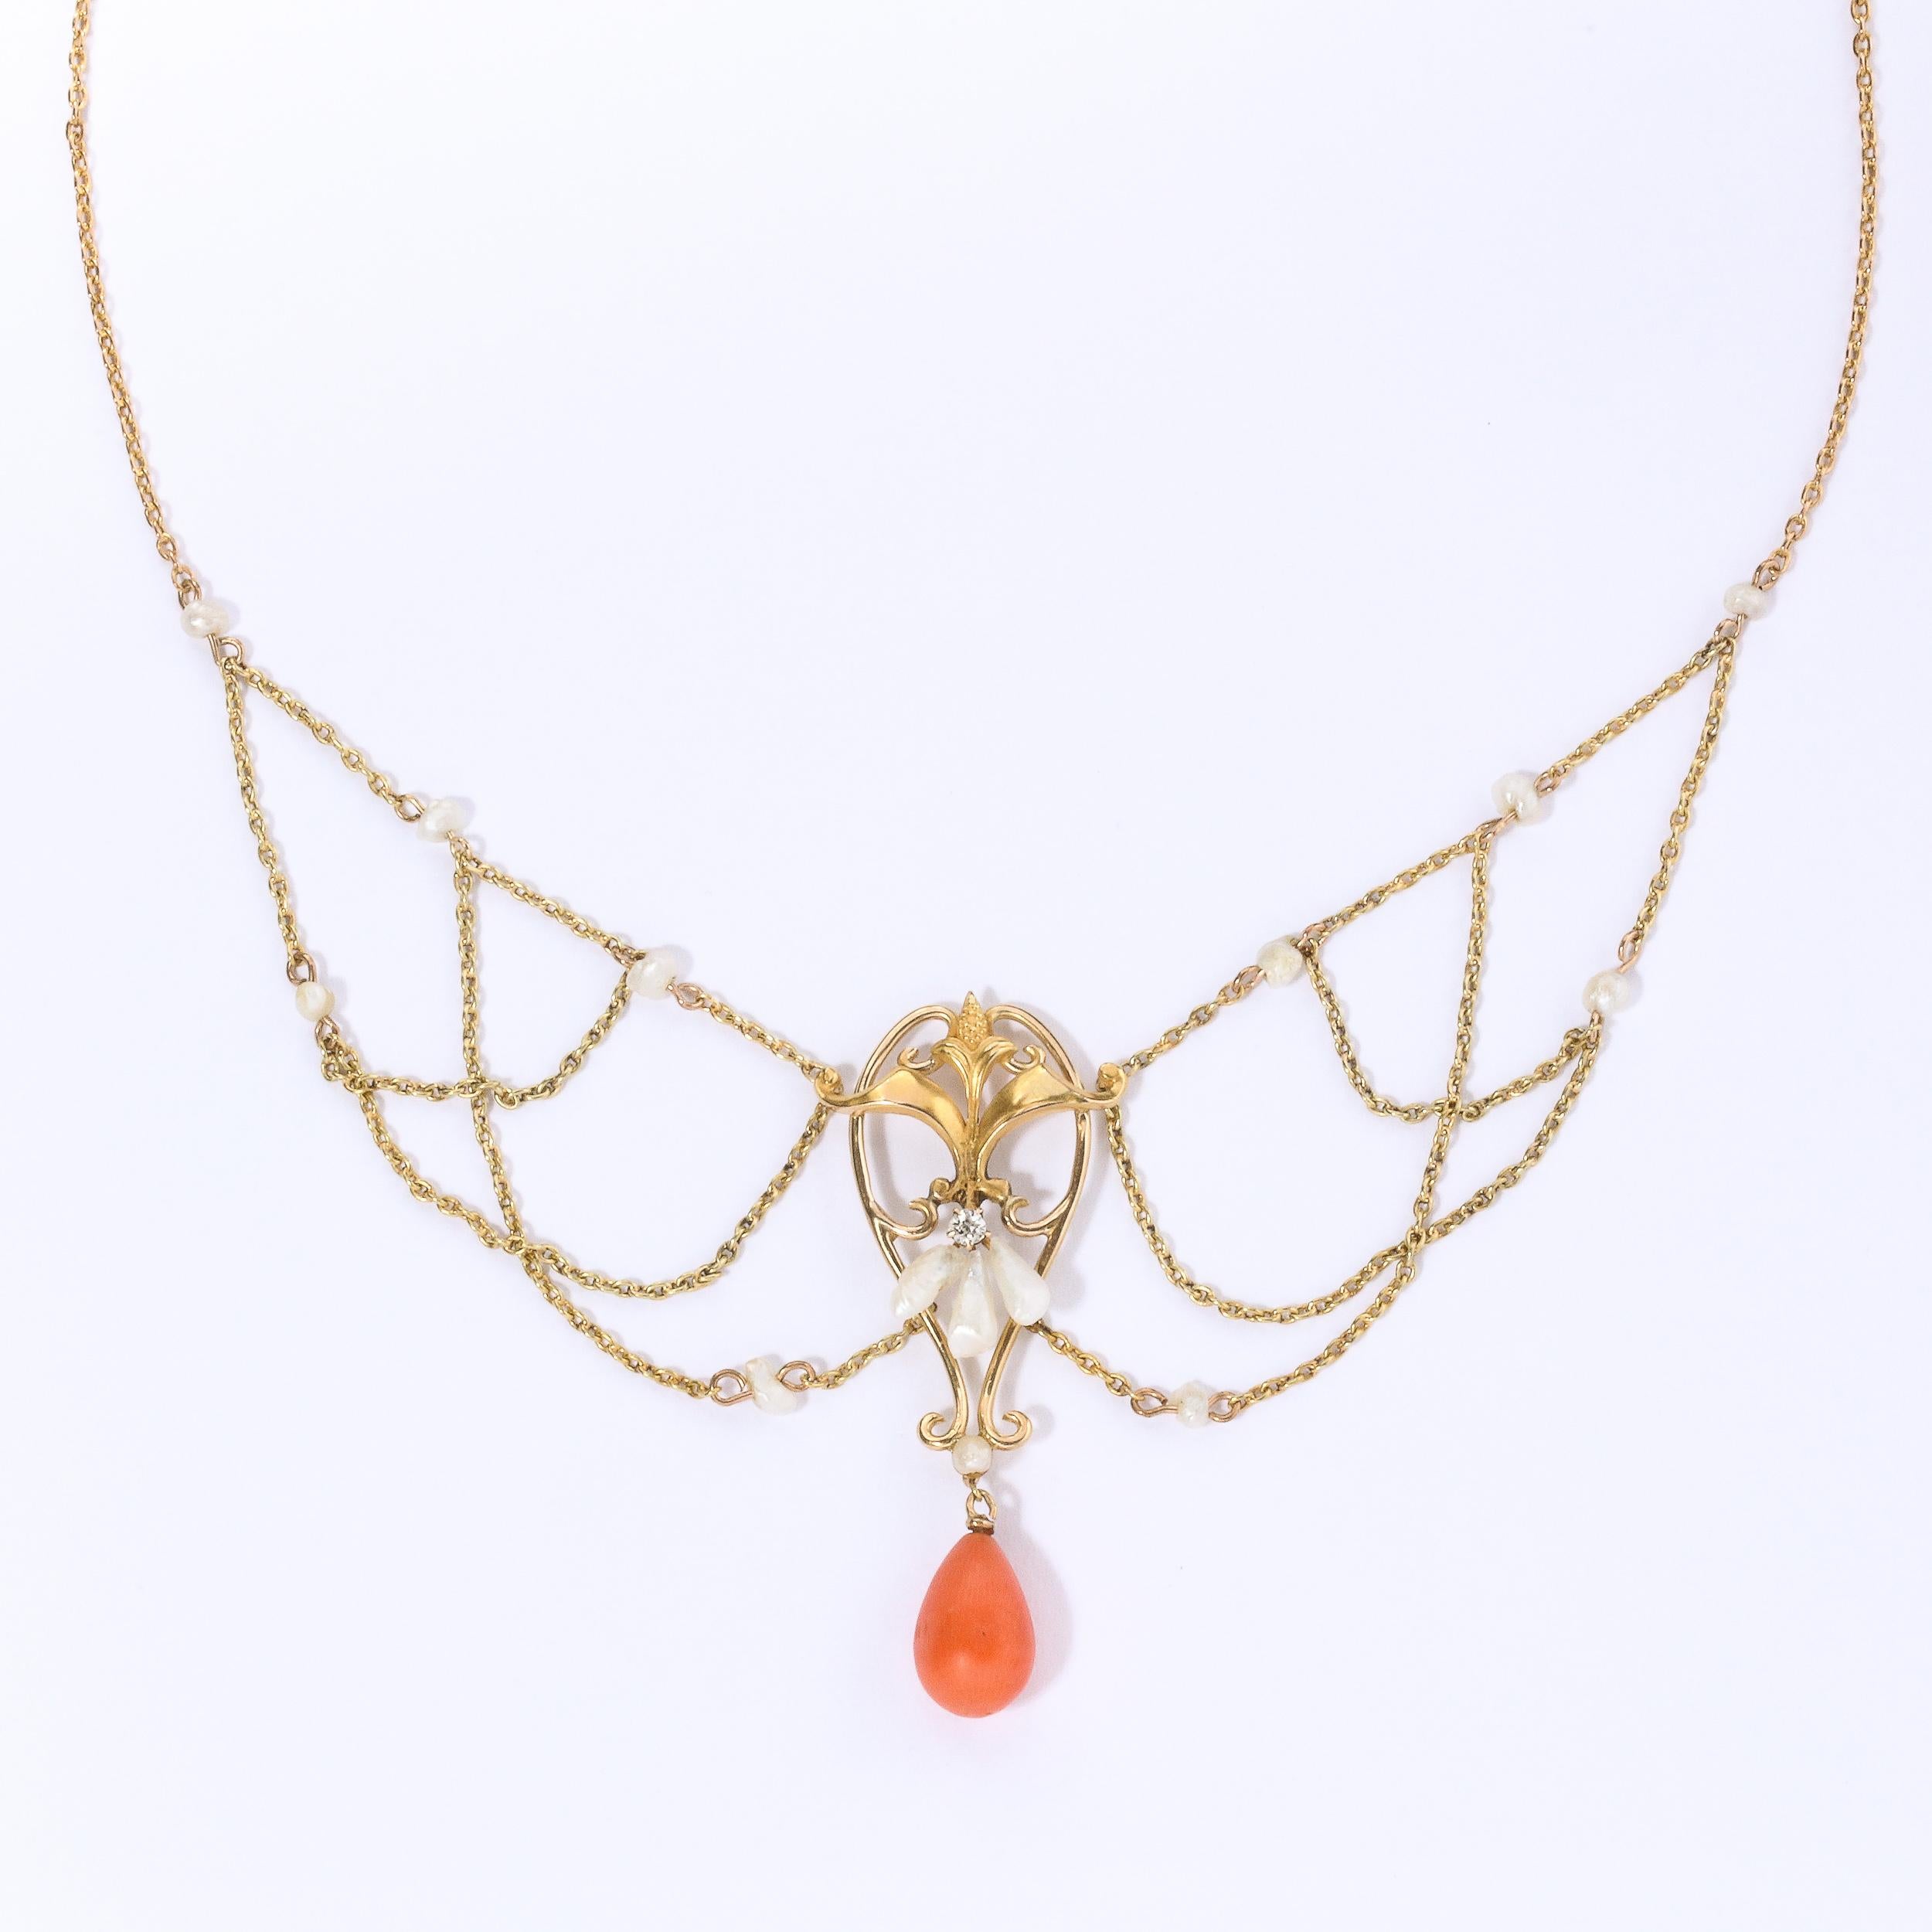 Art Nouveau 14k gold , pearl, coral and diamond swag necklace with central foliate form pendant accented by a single prong-set diamond and 3 natural pearl accents. Necklace terminates in a single polished pear-shaped coral drop pendant with seed